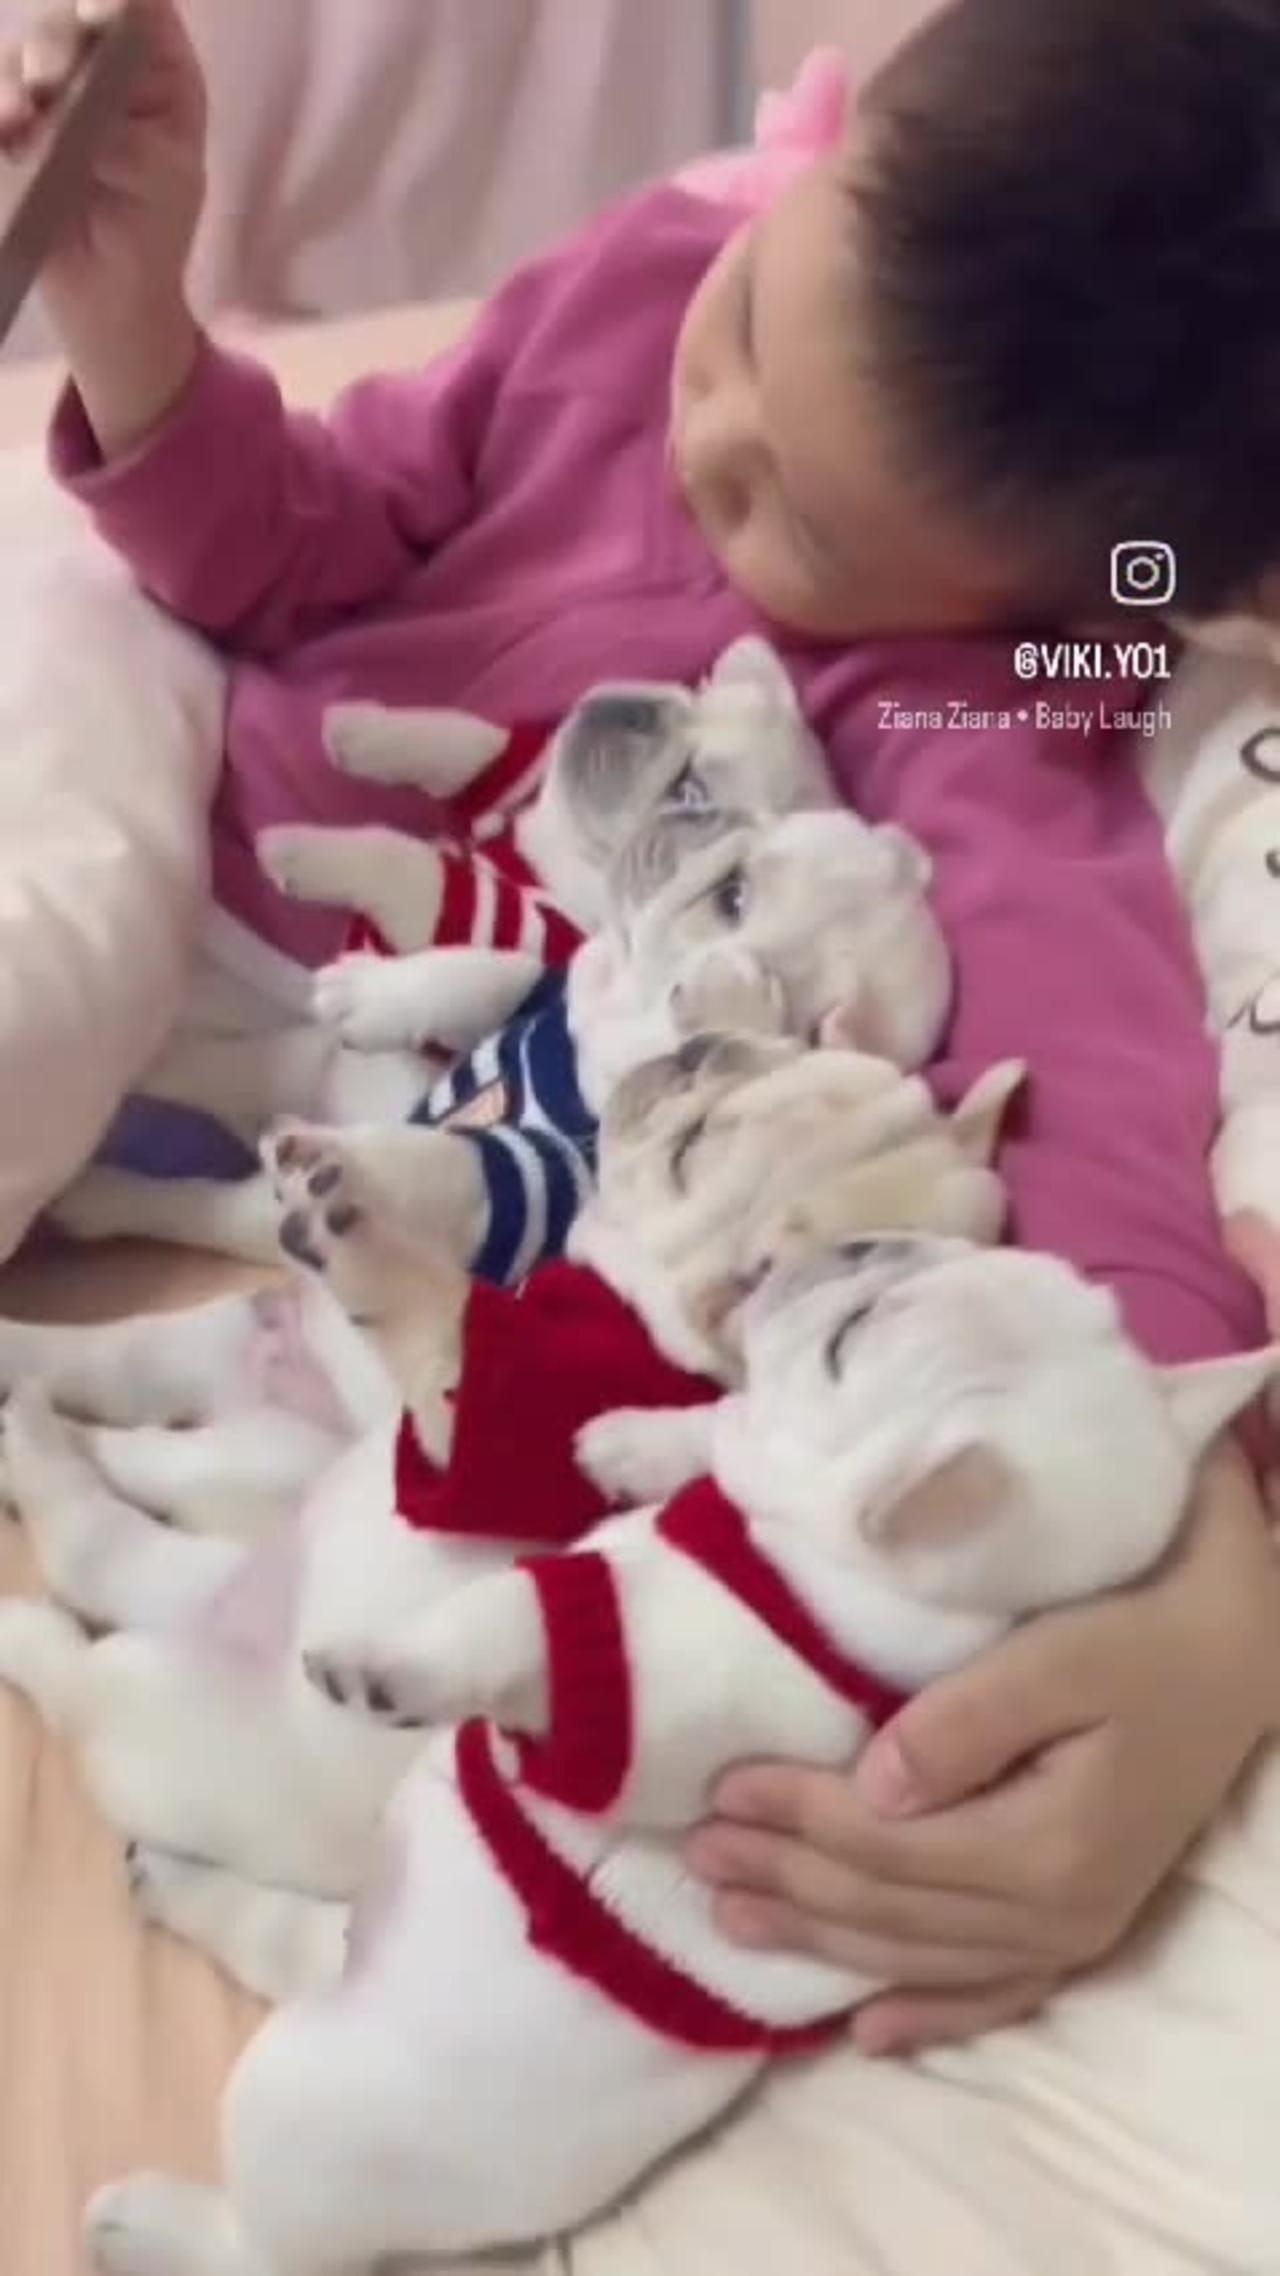 Cute baby watch video with puppies